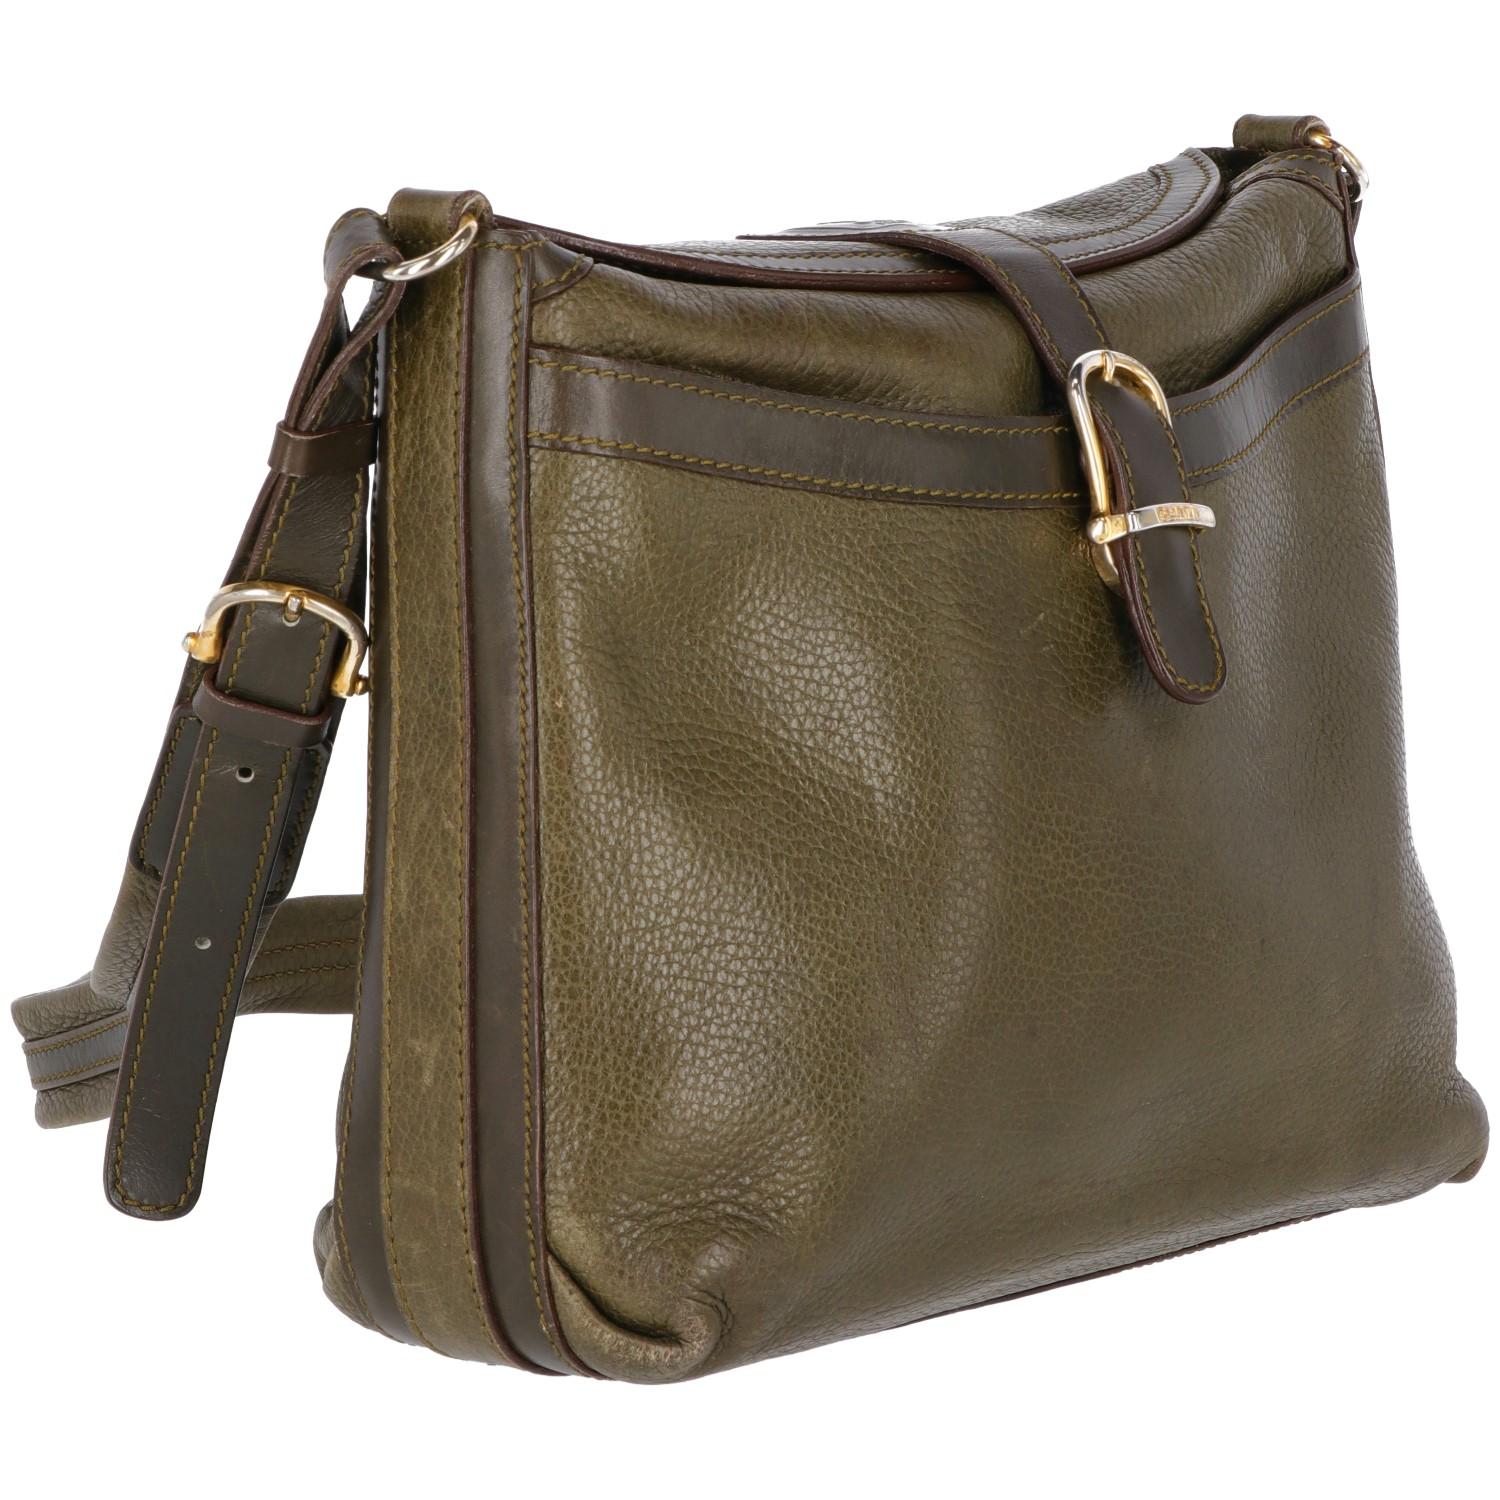 Classic Céline green leather shoulder bag. With gold-tone buckle closure and leather and metal details shoulder strap, it features a brown/bordeaux lining, and two pockets, the welt outer pocket and the inner zip- pocket.  

The item is vintage: it